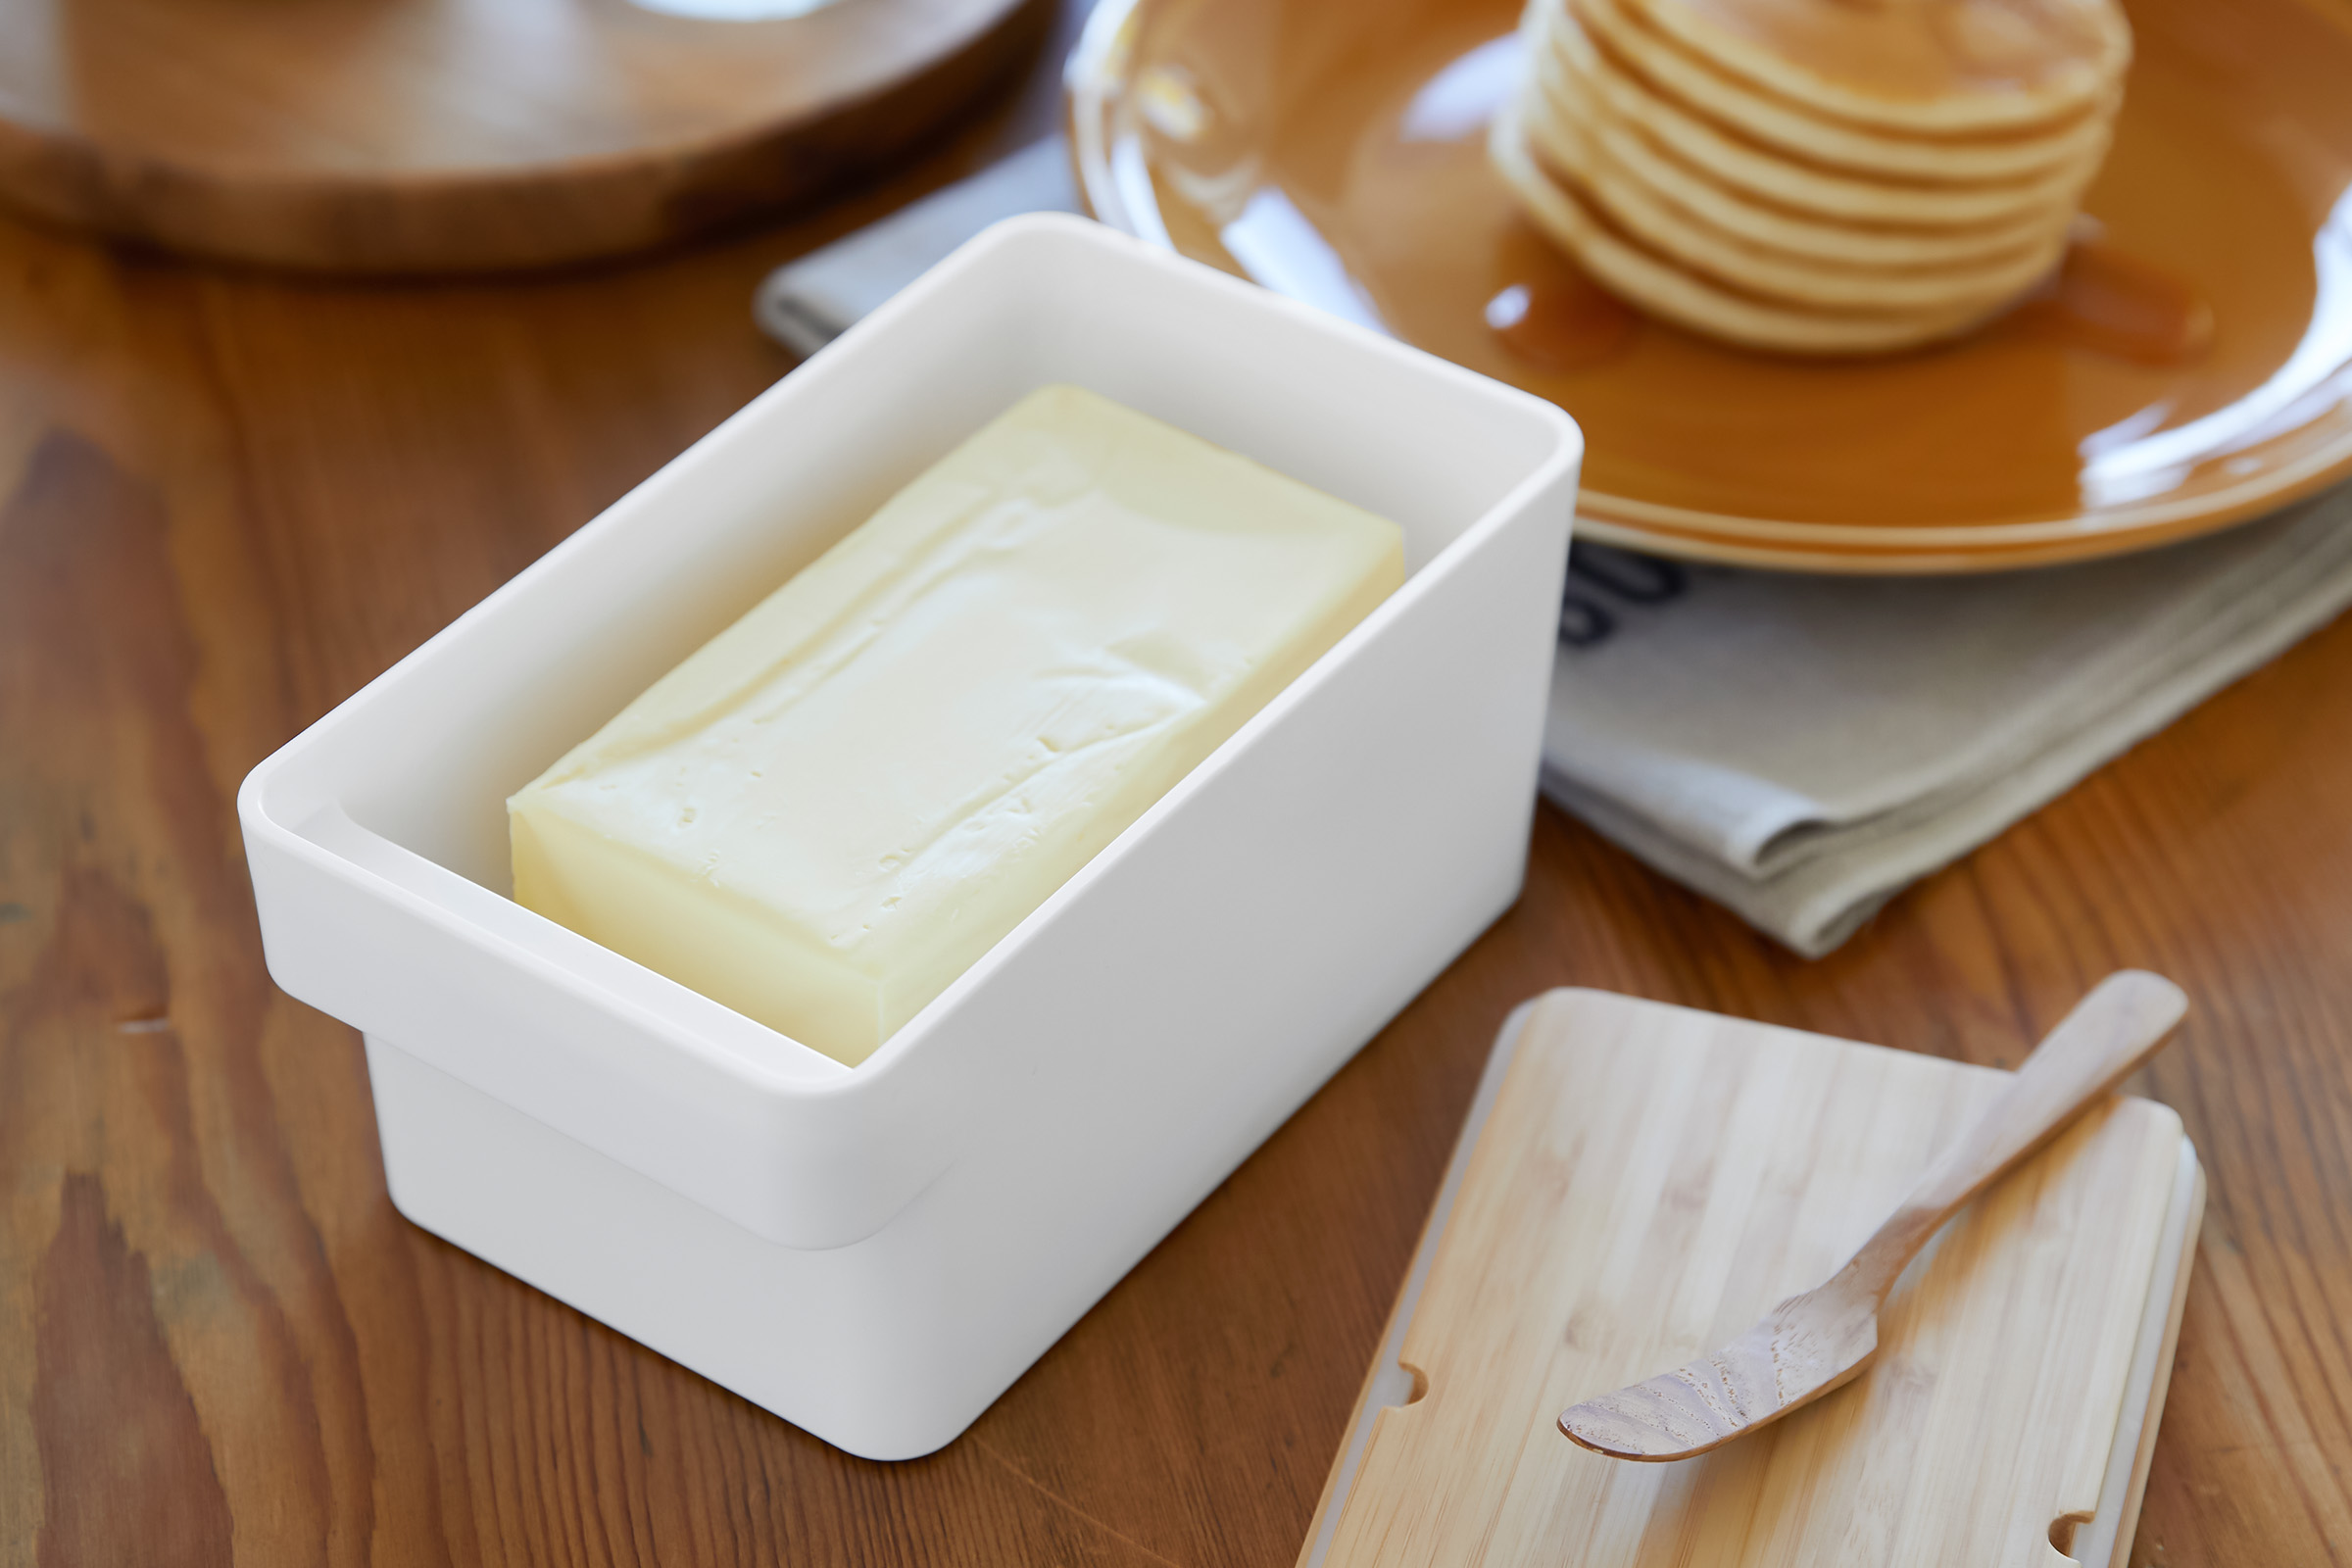 Yamazaki Butter Case opened on a dining table with butter inside